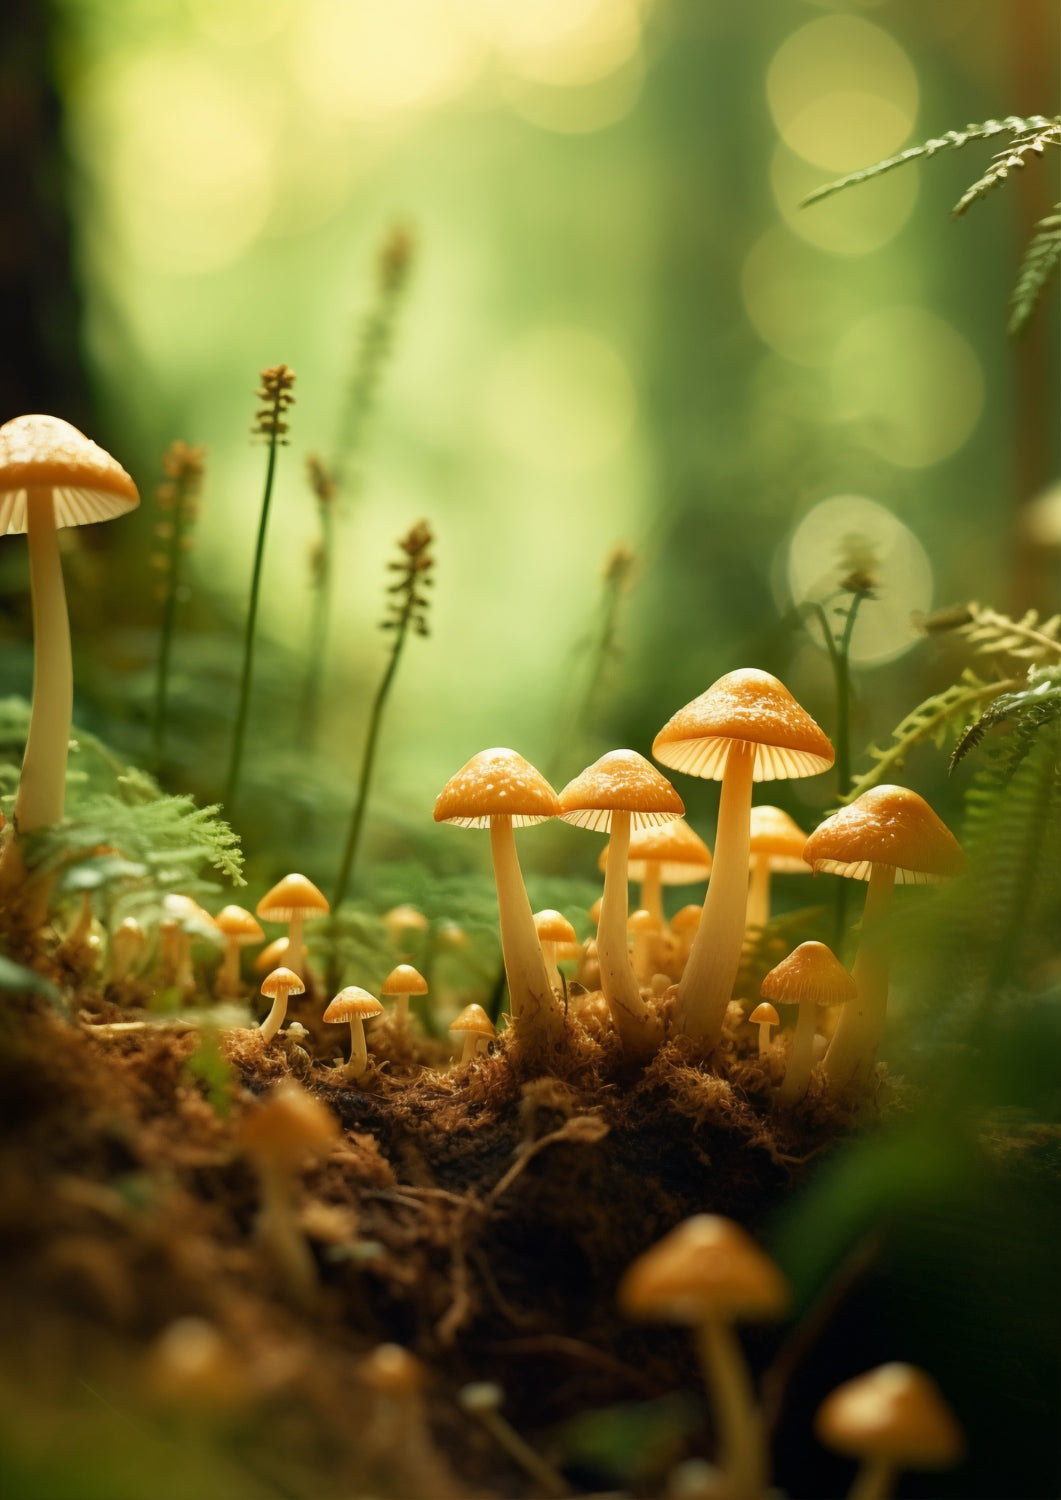 Celebrating Earth Day: The Planet That Gave Us Mushrooms